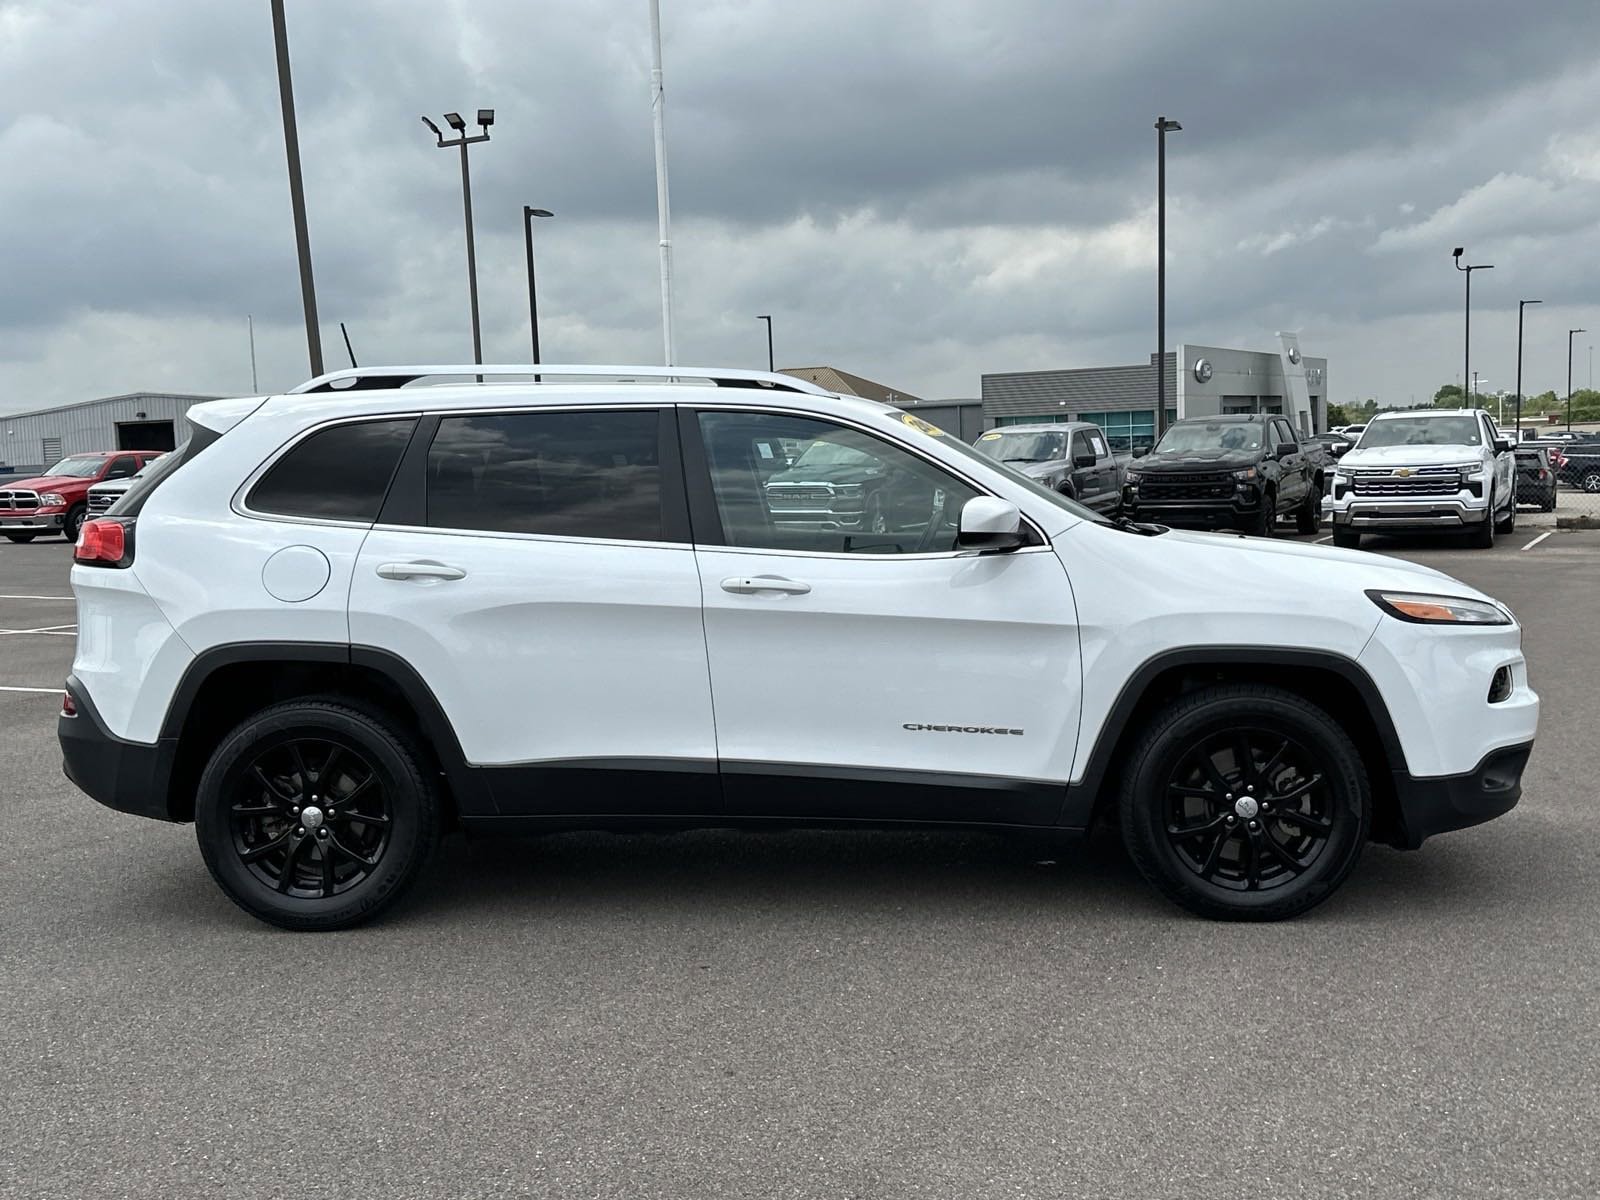 Used 2018 Jeep Cherokee Latitude Plus with VIN 1C4PJLLB5JD583881 for sale in Southaven, MS